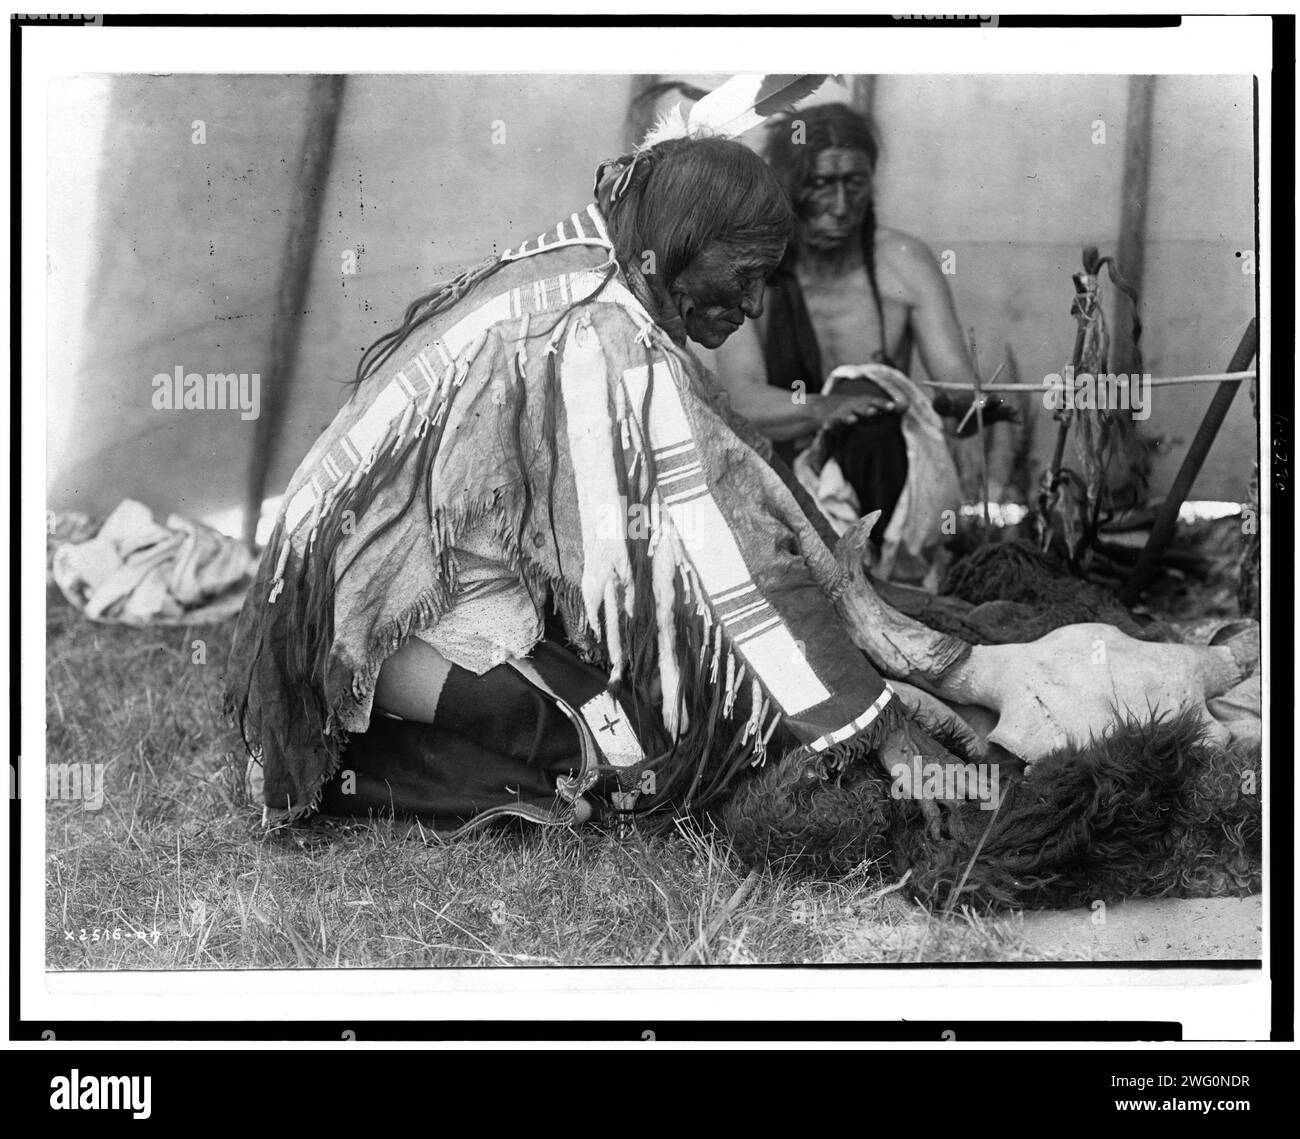 Hu Kalowa Pi-Removes the covering, c1907. Interior of tepee, man kneeling on ground remouving buffalo hide around skull on ground, another male behind altar warming hands by fire. Stock Photo